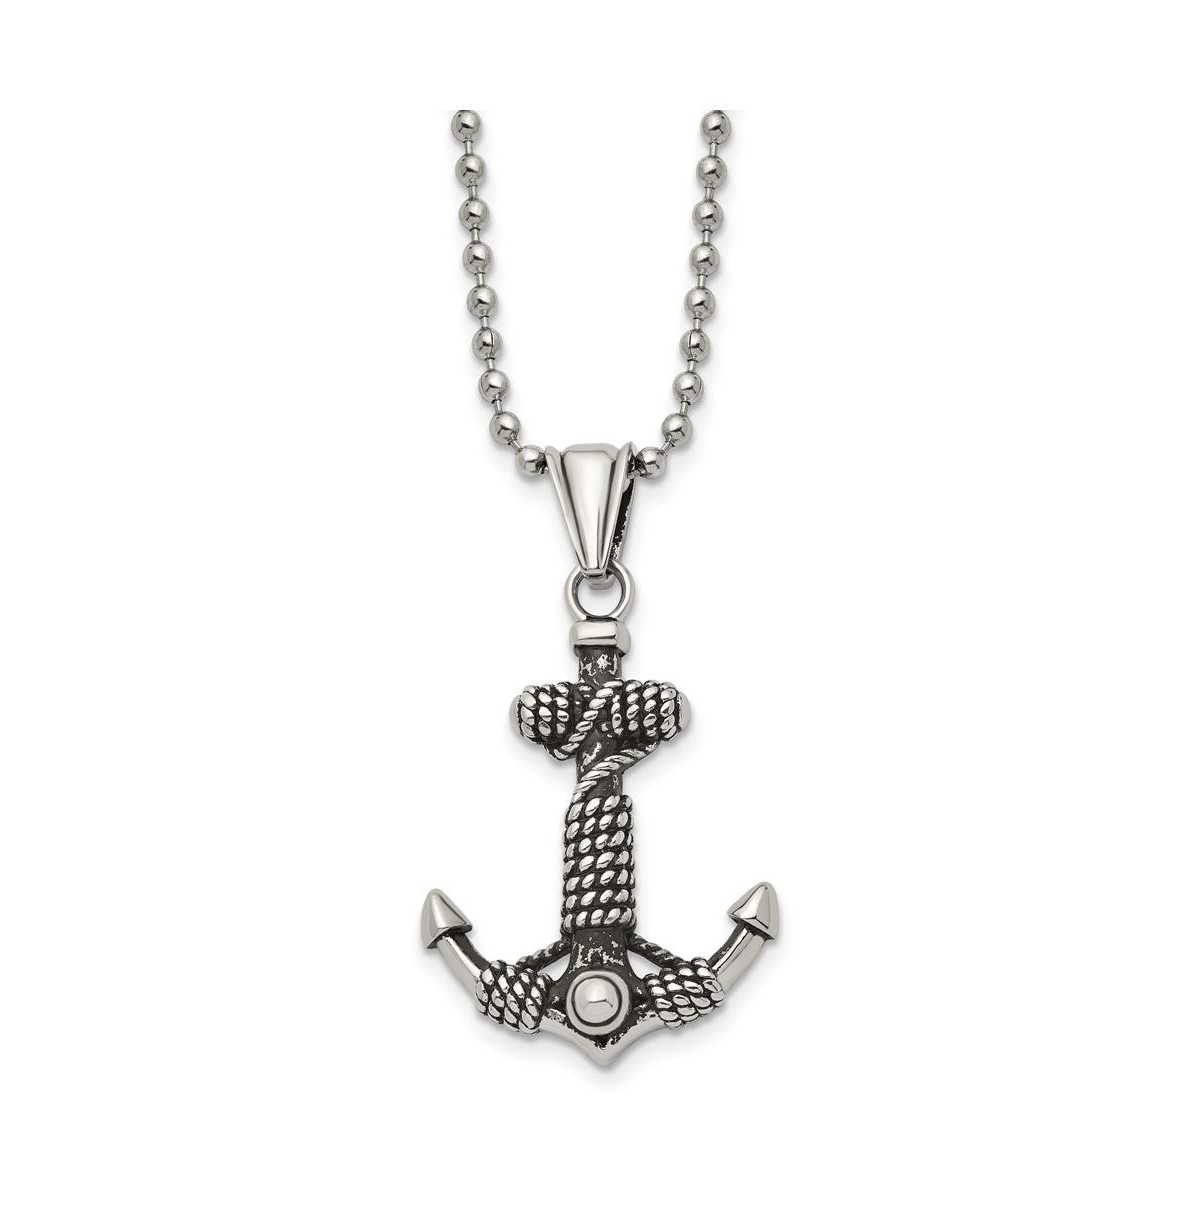 Antiqued Anchor with Rope Pendant Ball Chain Necklace - Black